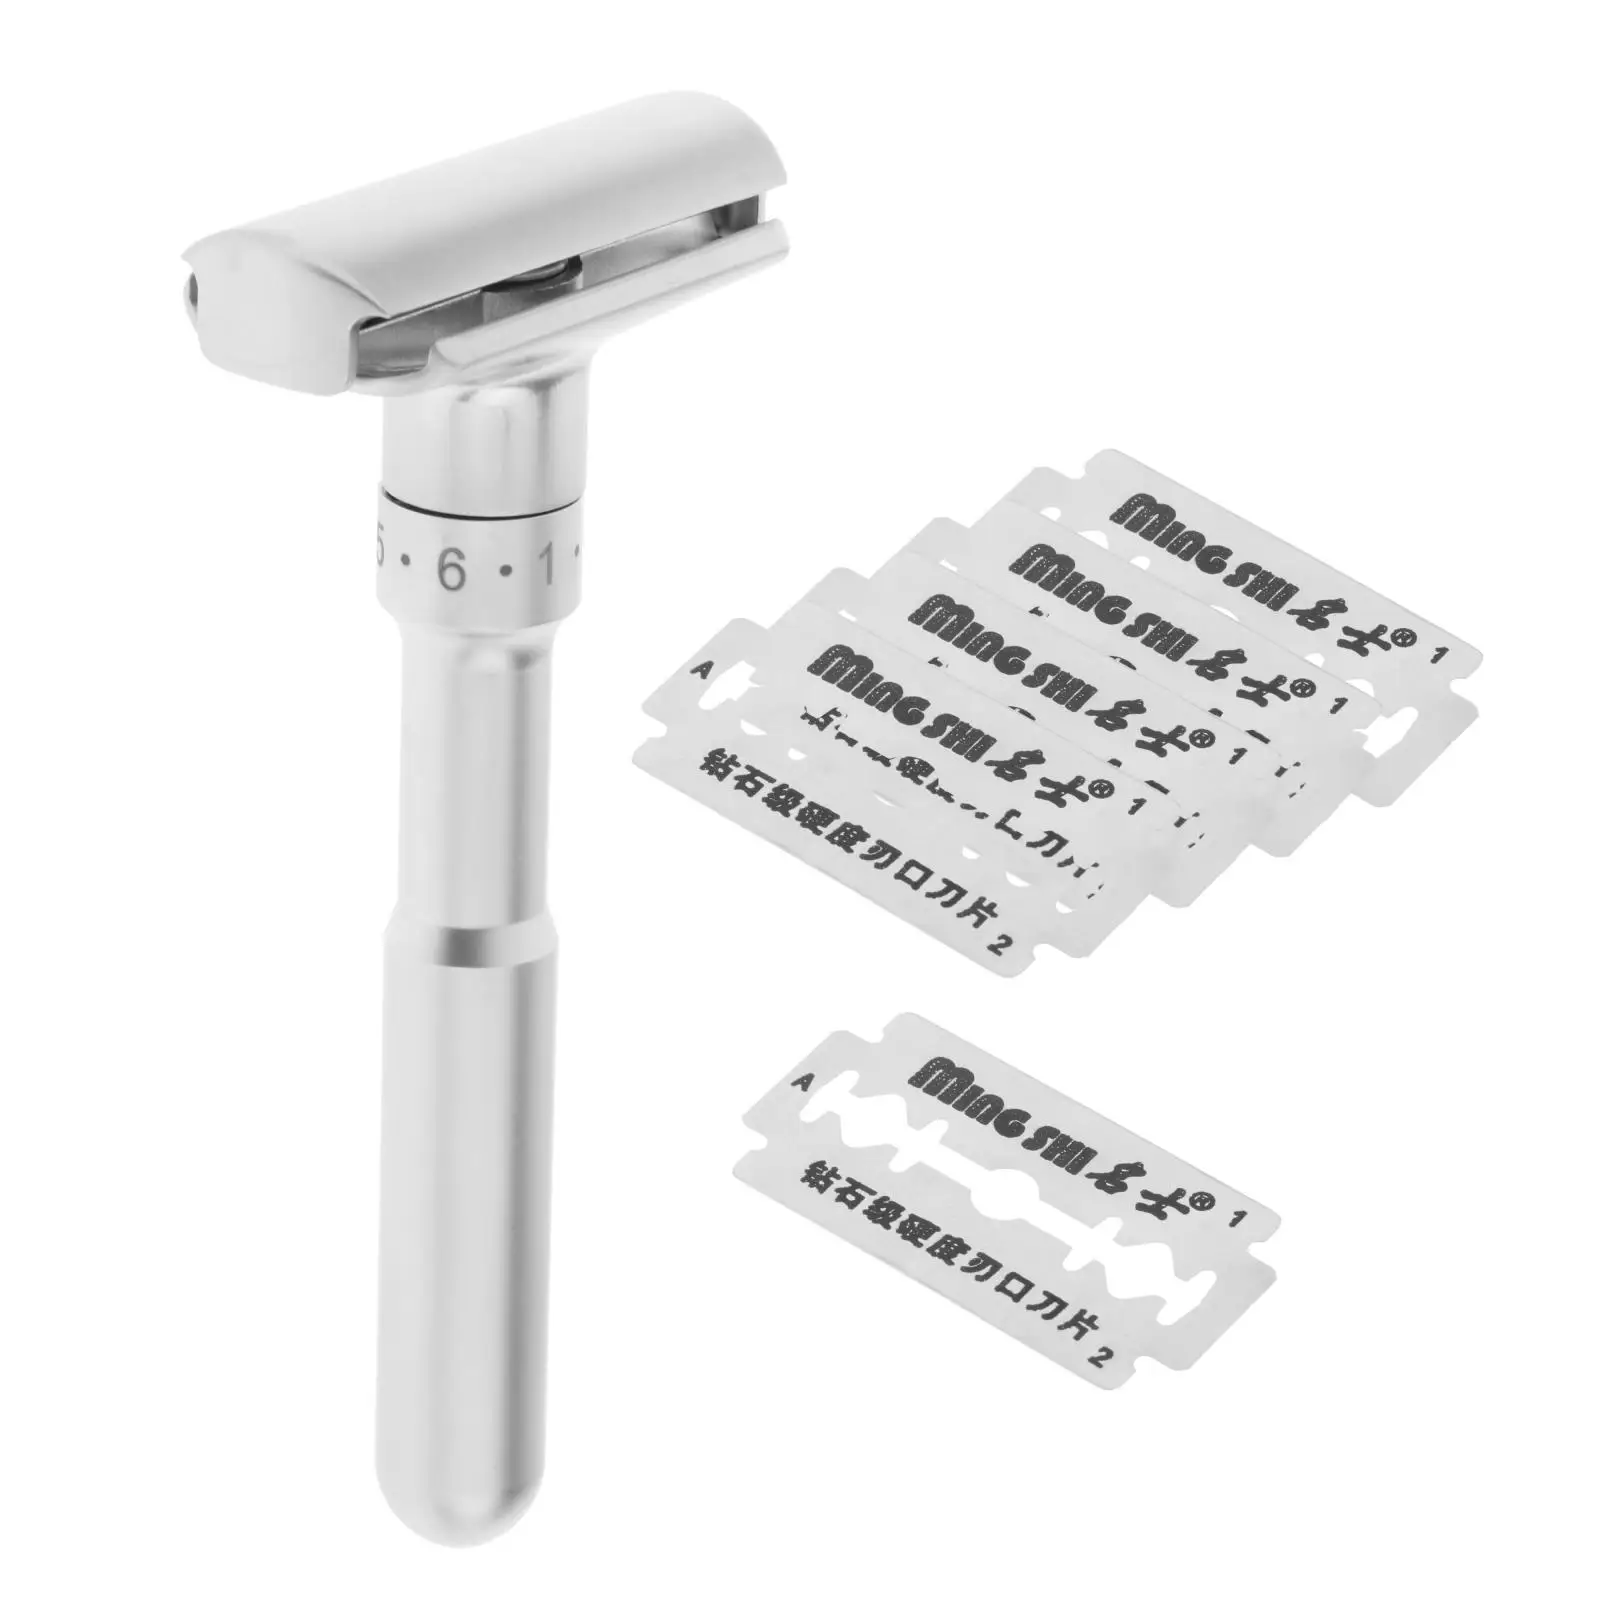 Adjustable Safety Razor with 5 Blades Double Edge Zinc Alloy Classic for file Hair.